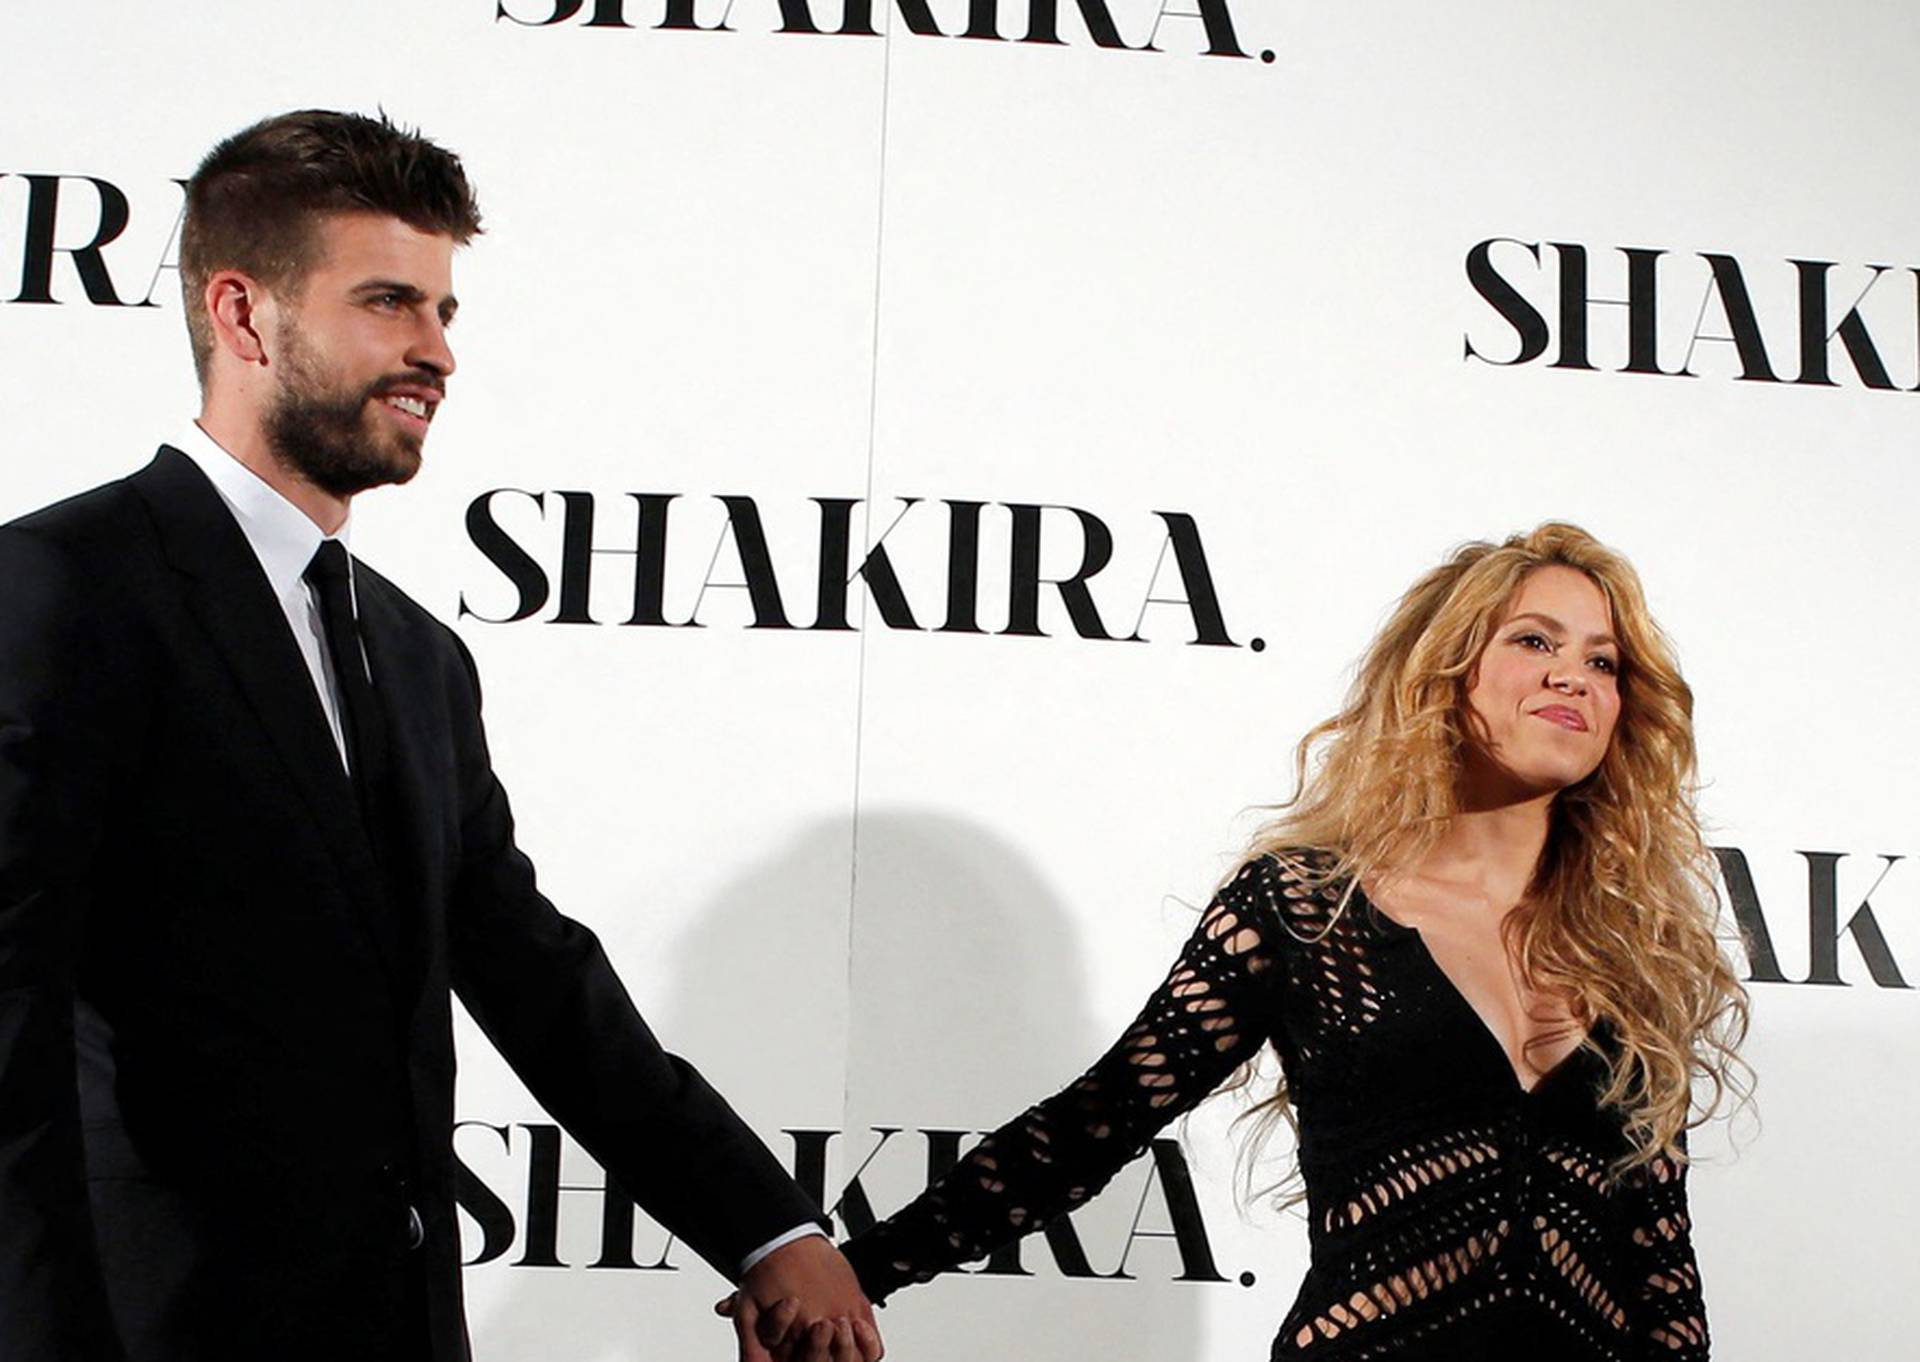 FILE PHOTO: Colombian singer Shakira and Barcelona's soccer player Gerard Pique pose during a photocall presenting her new album "Shakira" in Barcelona